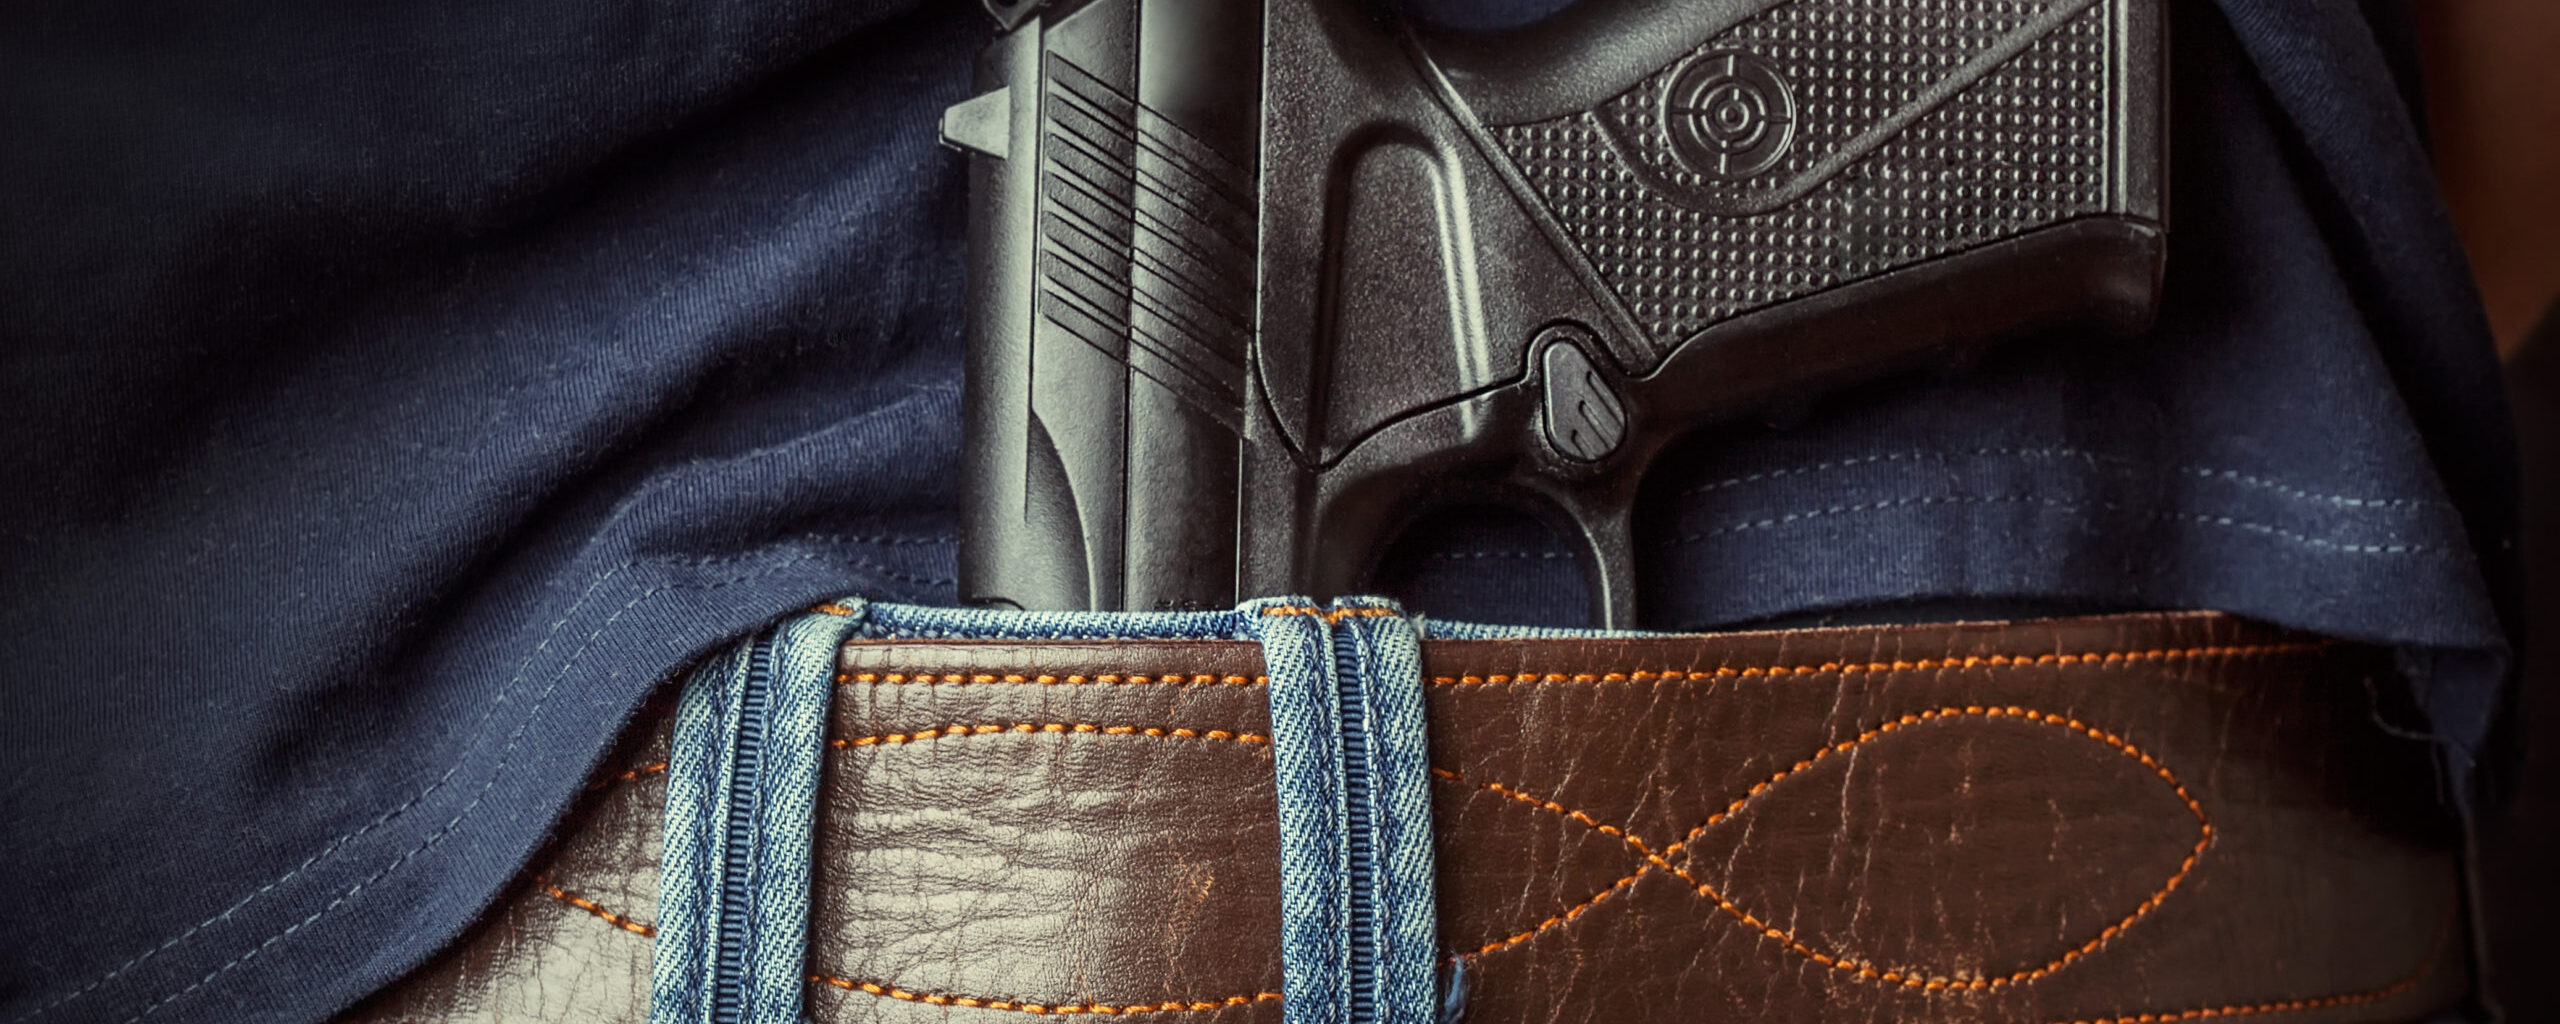 10 Reasons to Carry a Concealed Weapon